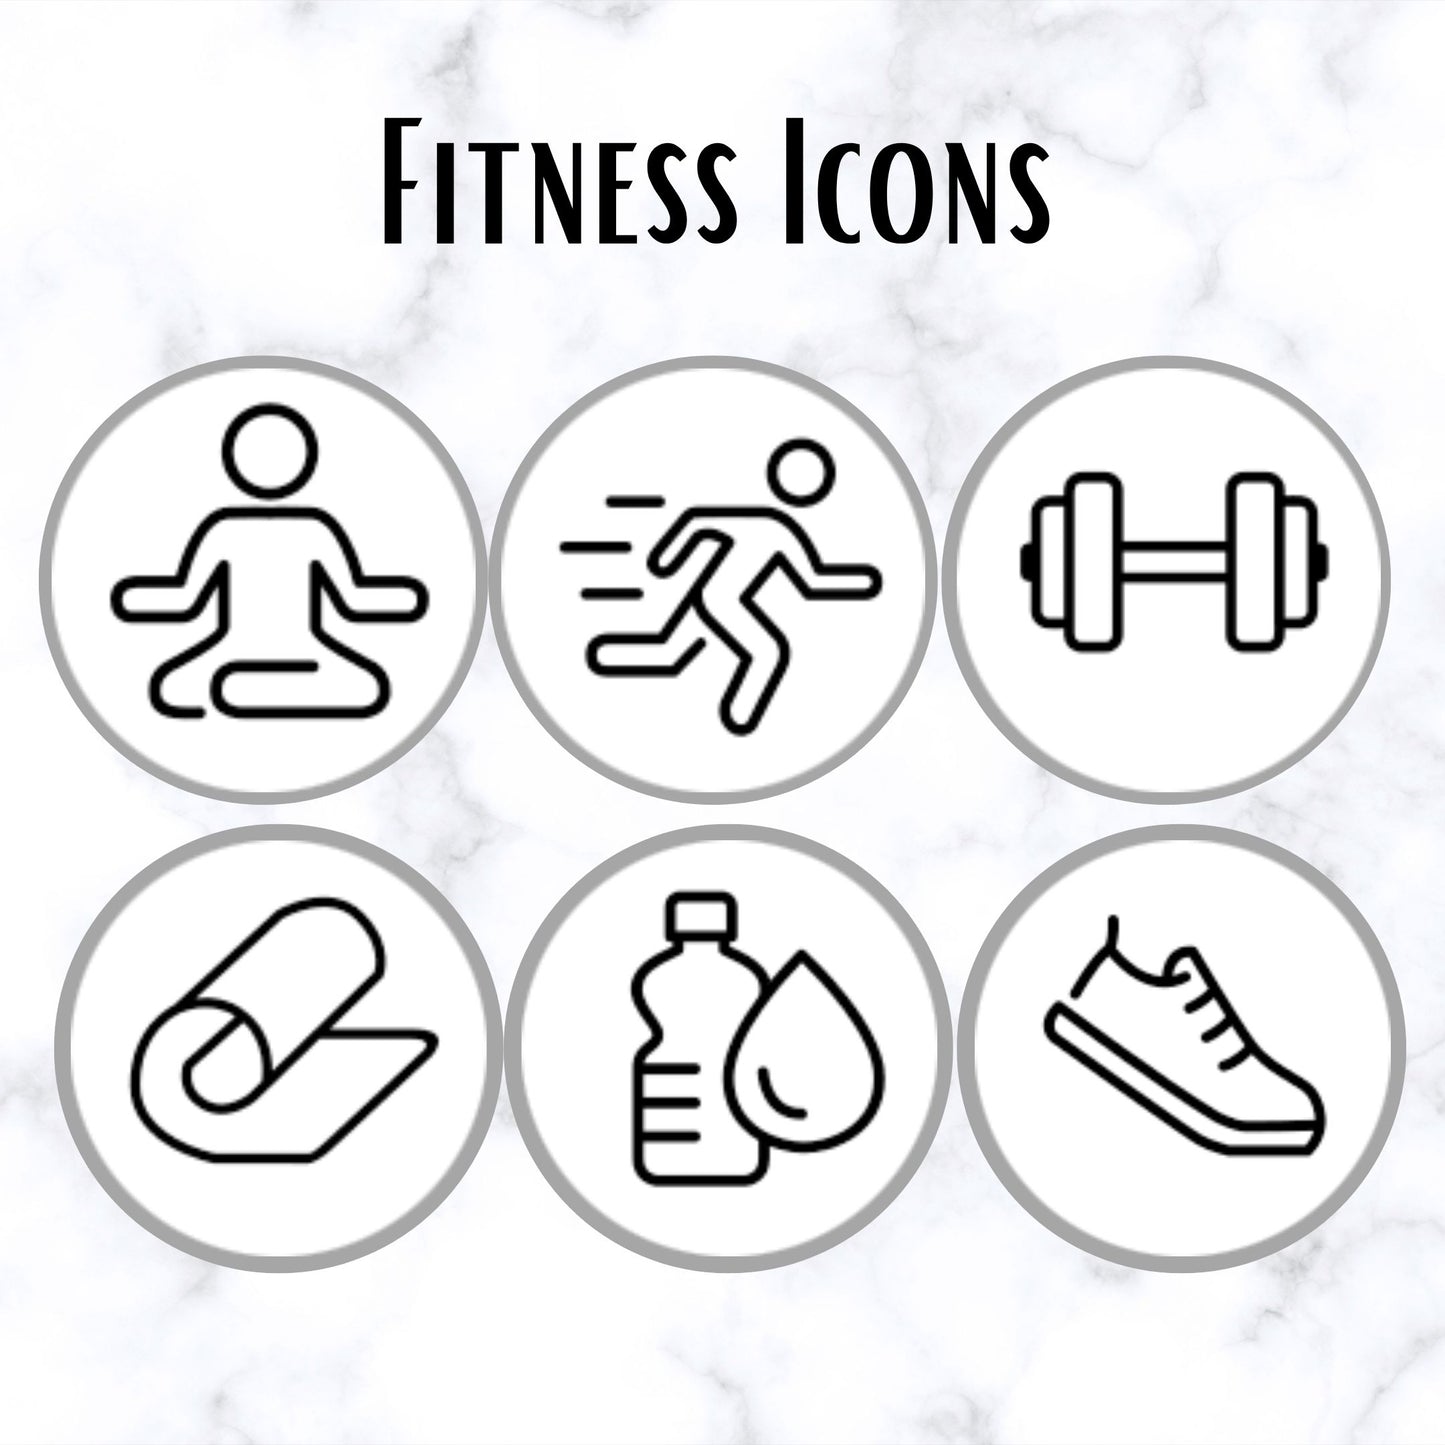 Fitness Icons for Planners